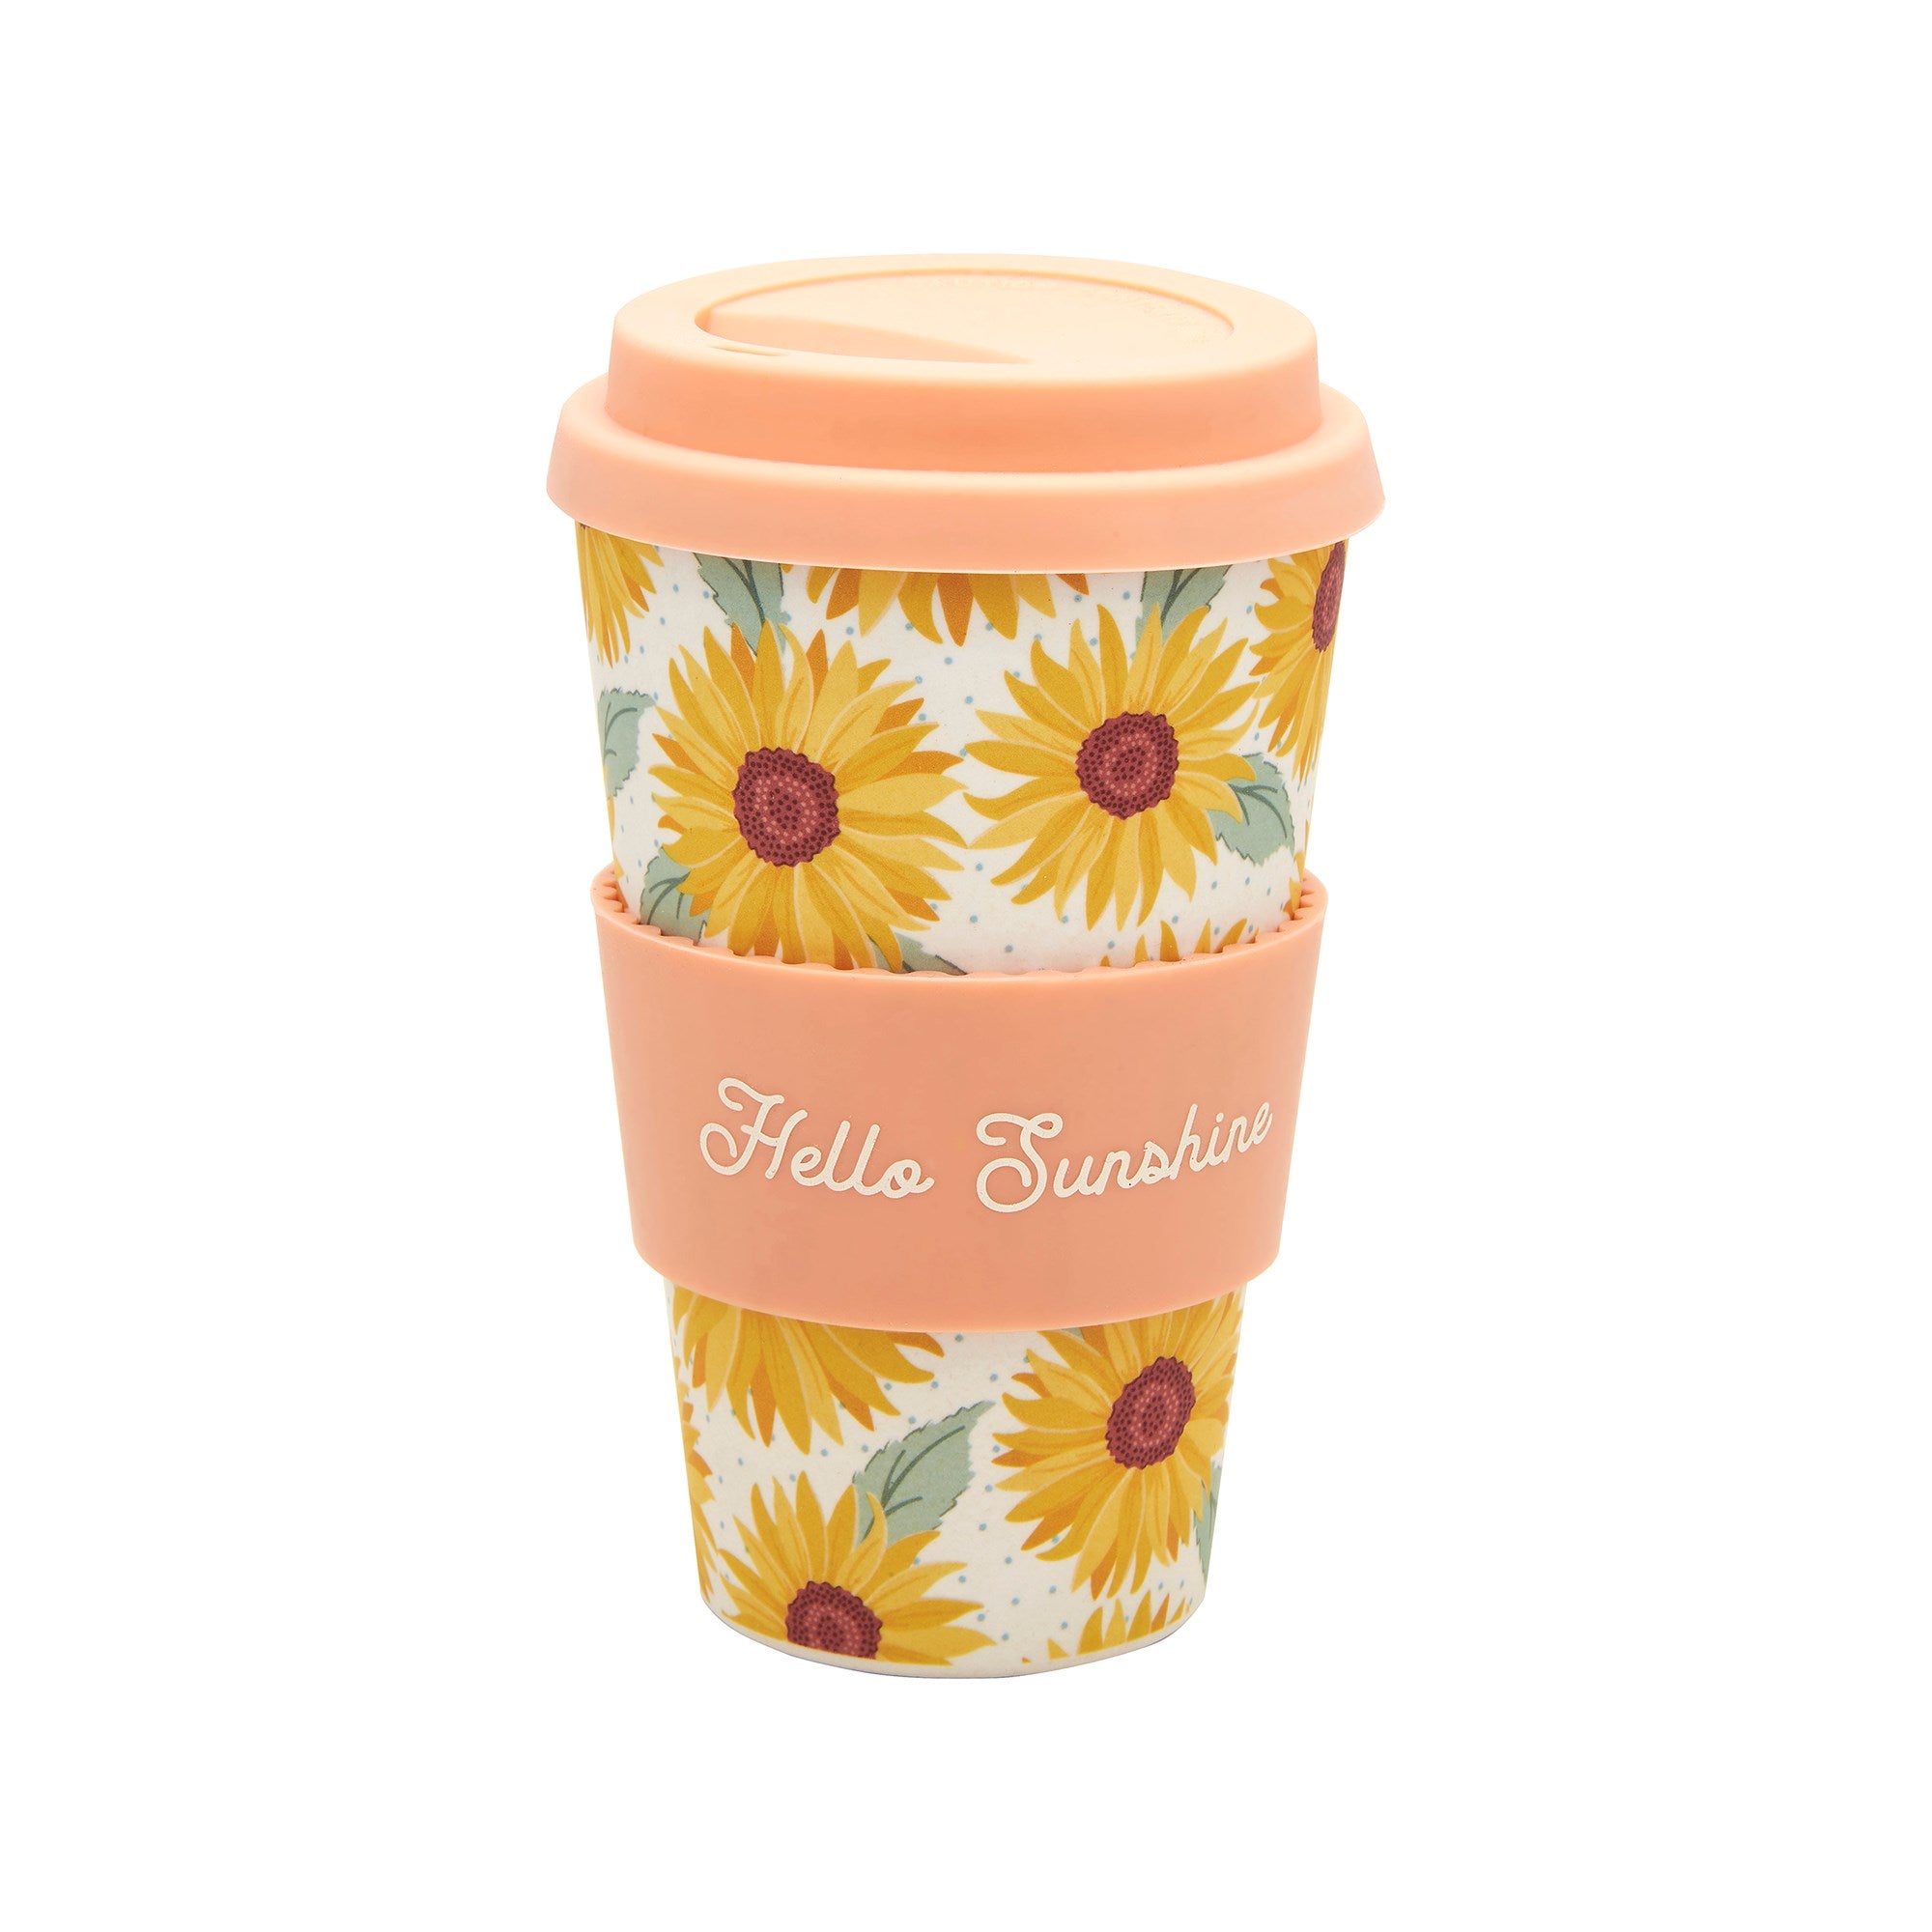 Sunflowers Bamboo Travel Coffee Cup with Silicone Lid - The Cooks Cupboard Ltd